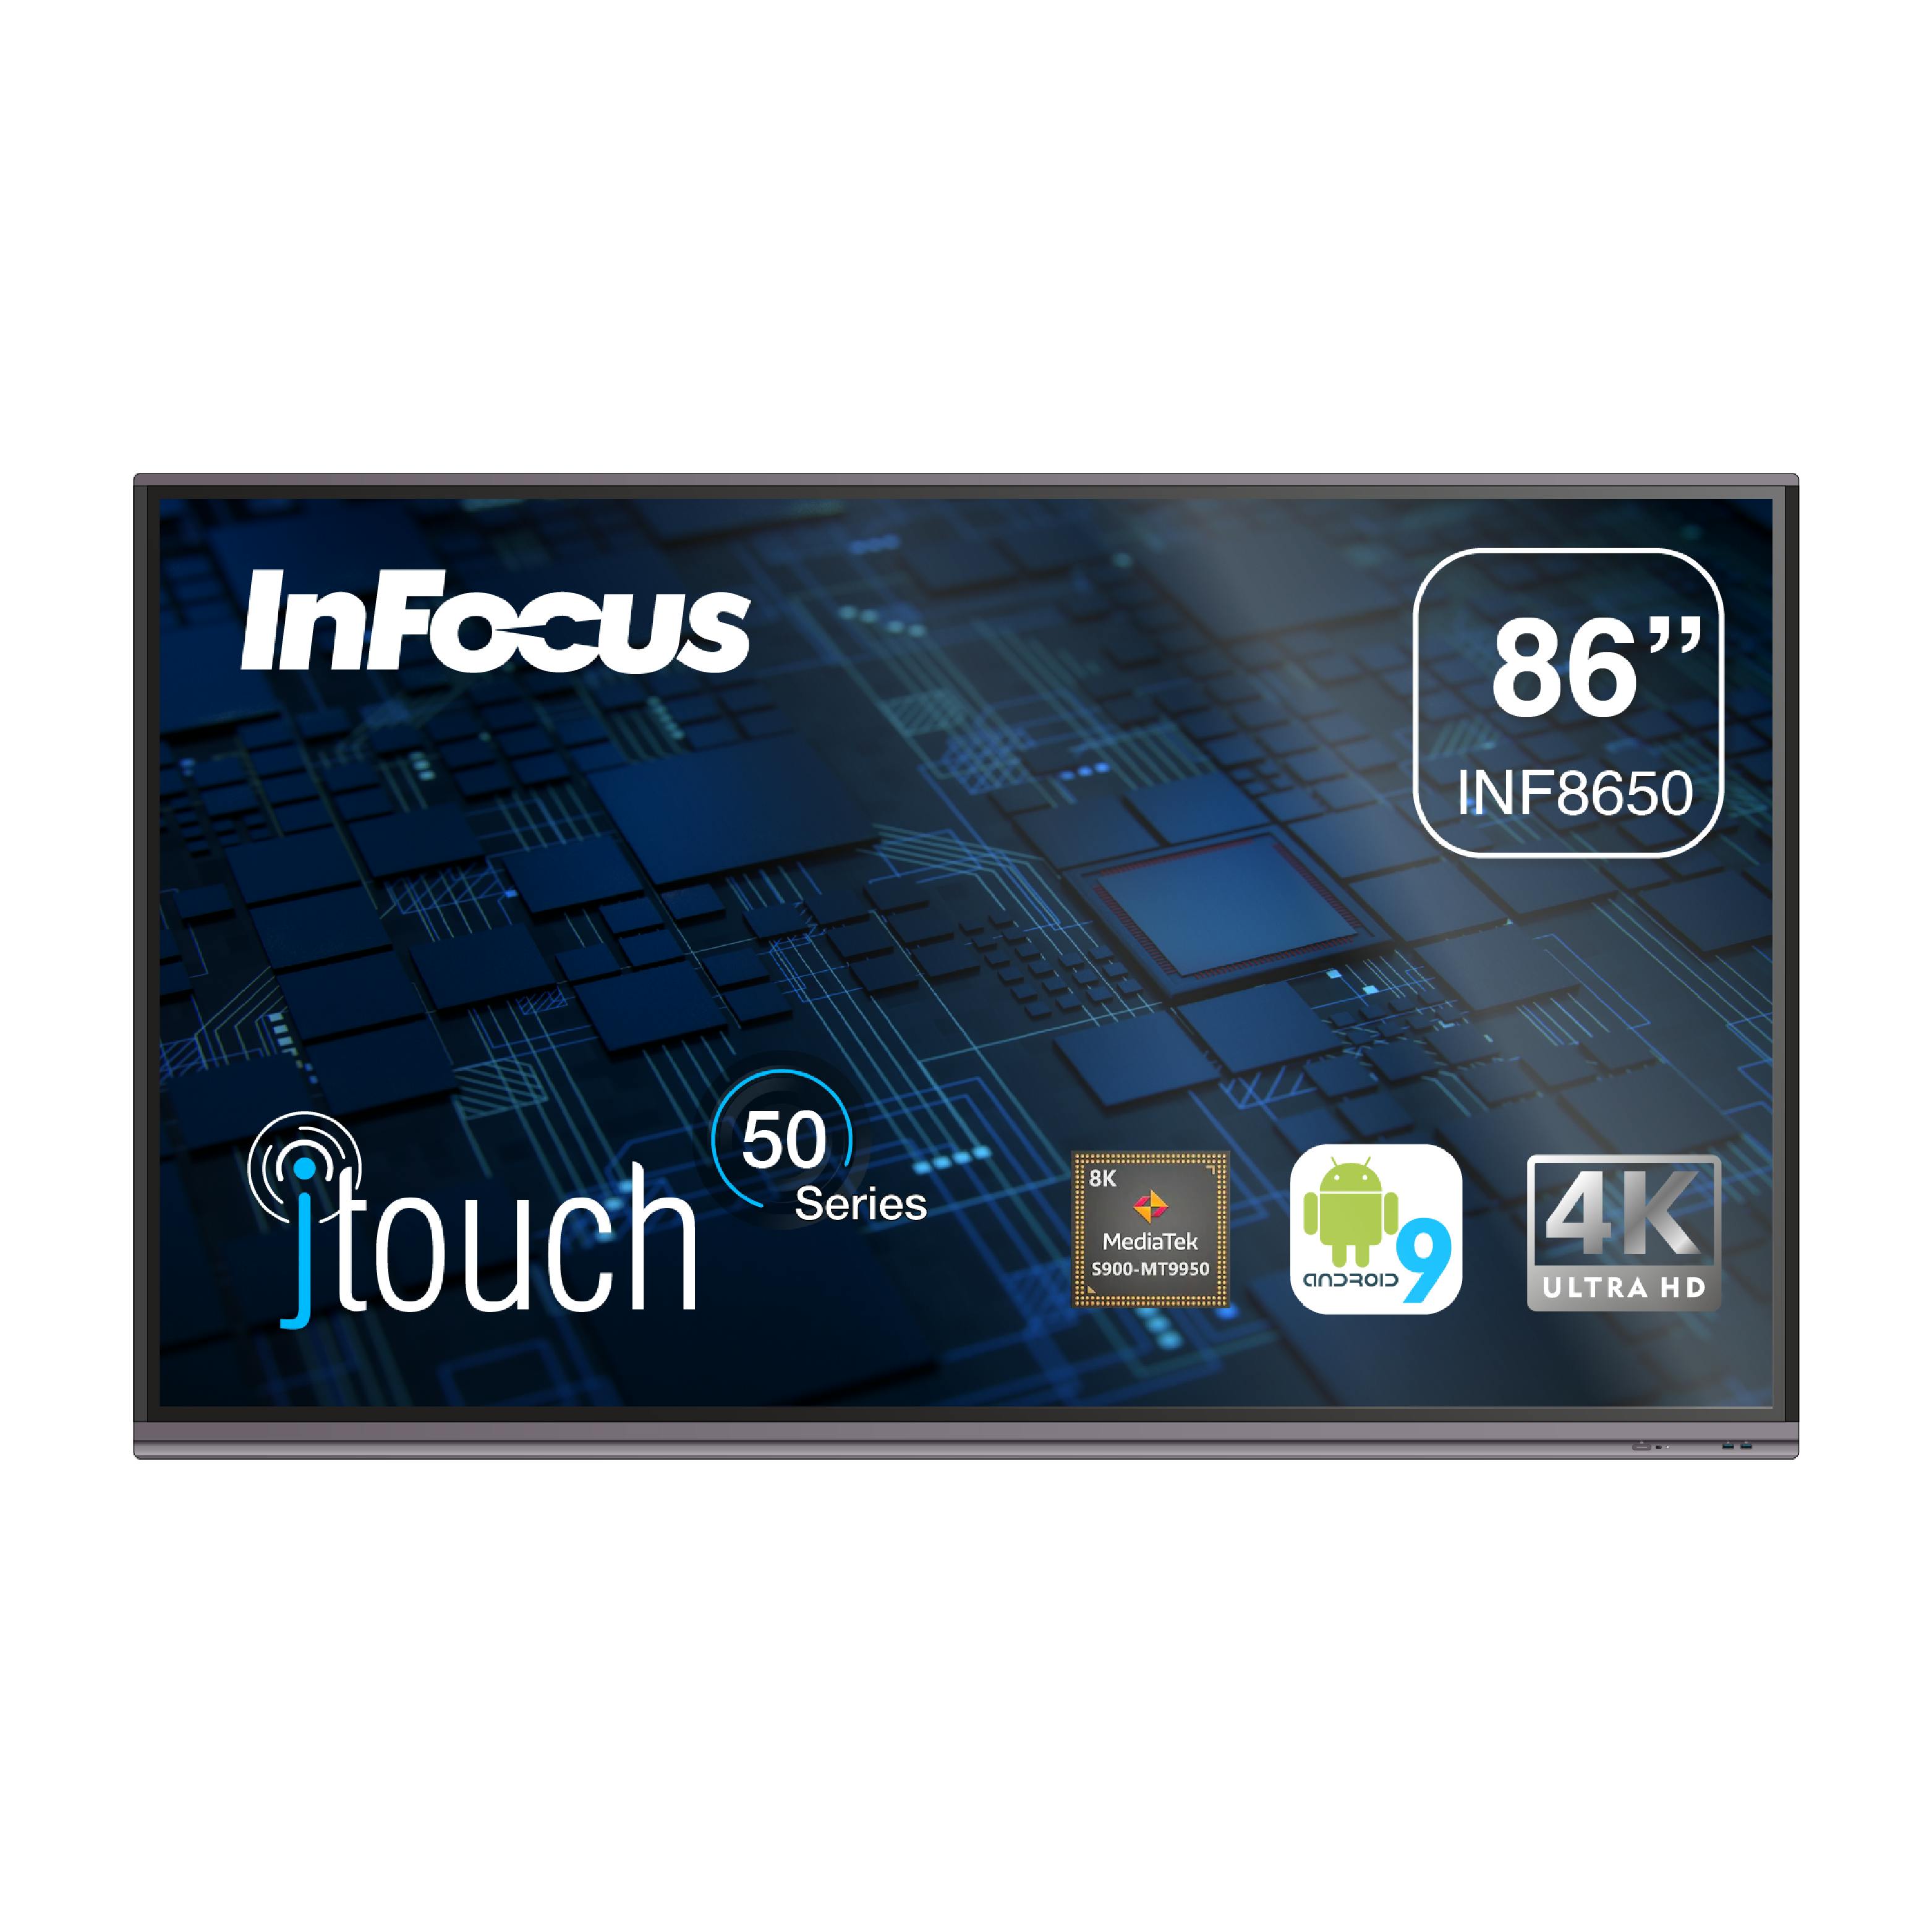 https://infocus.imgix.net/2022/04/JTouch-50-Series_INF8650_F_90-01.png?auto=compress%2Cformat&ixlib=php-3.3.1